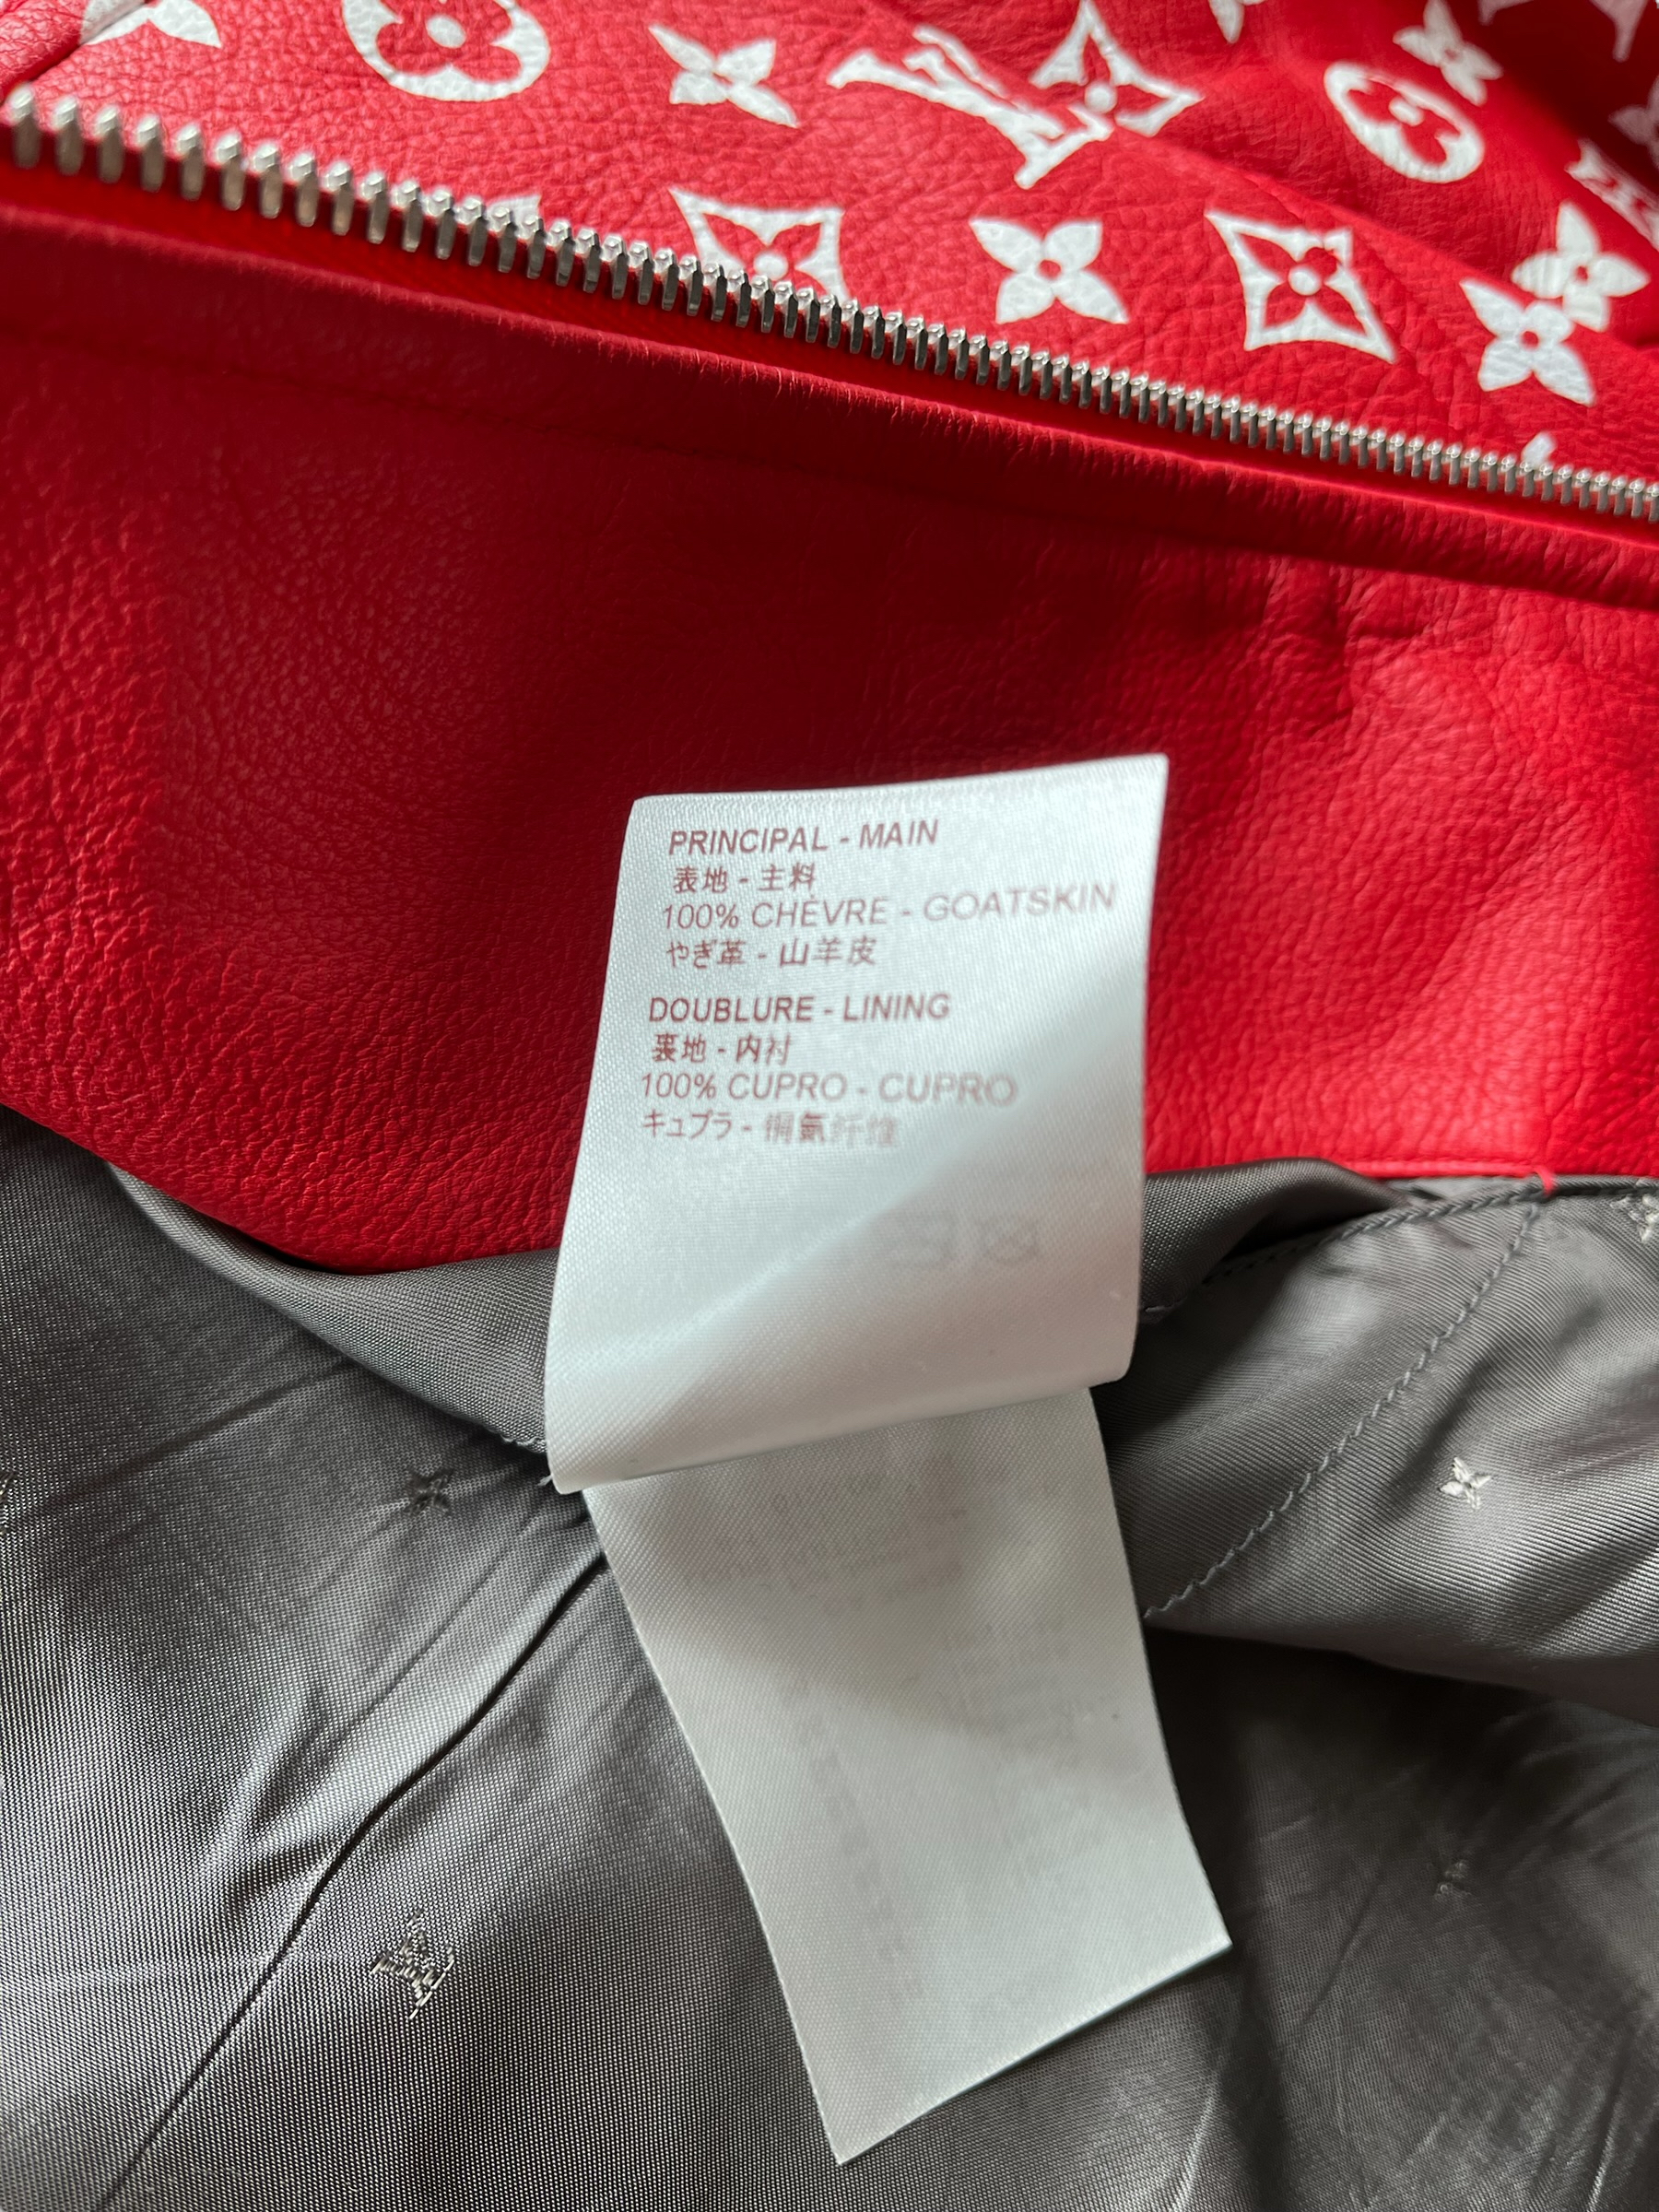 Supreme Louis Vuitton Red Monogram With Snoopy Bomber Jacket - Tagotee